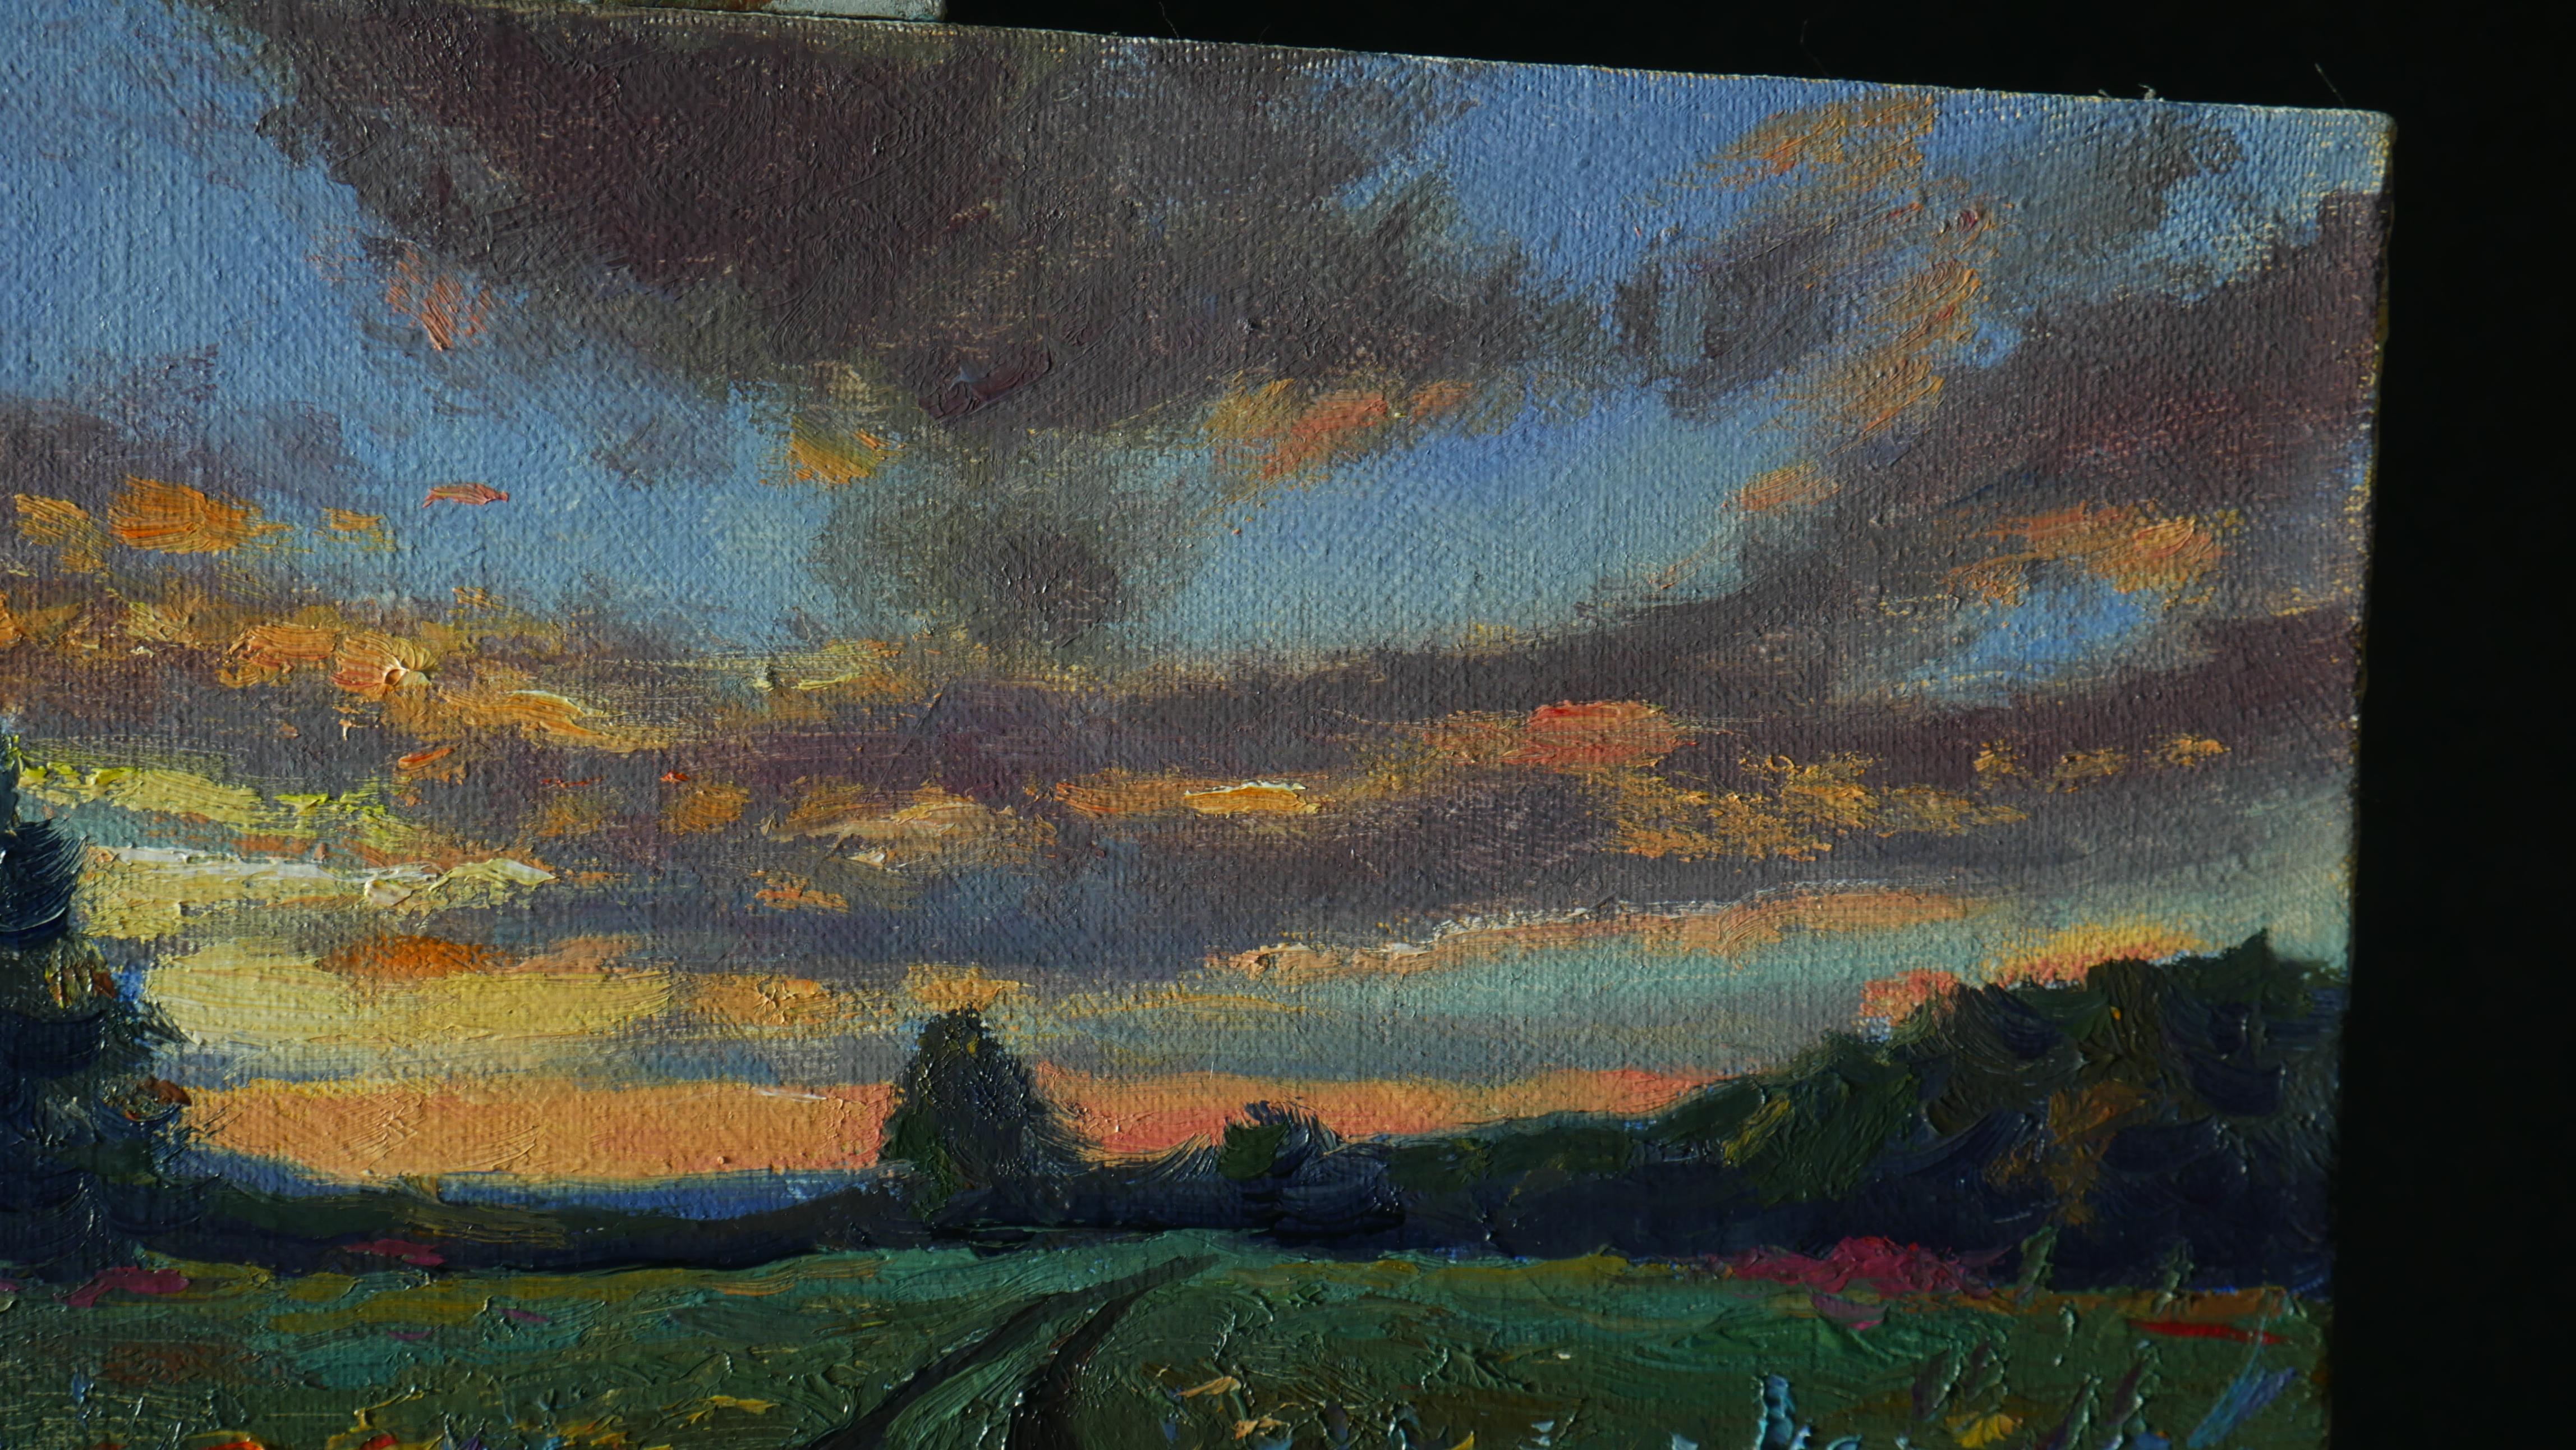 Sunset Over Wildflowers Field - summer landscape painting For Sale 1